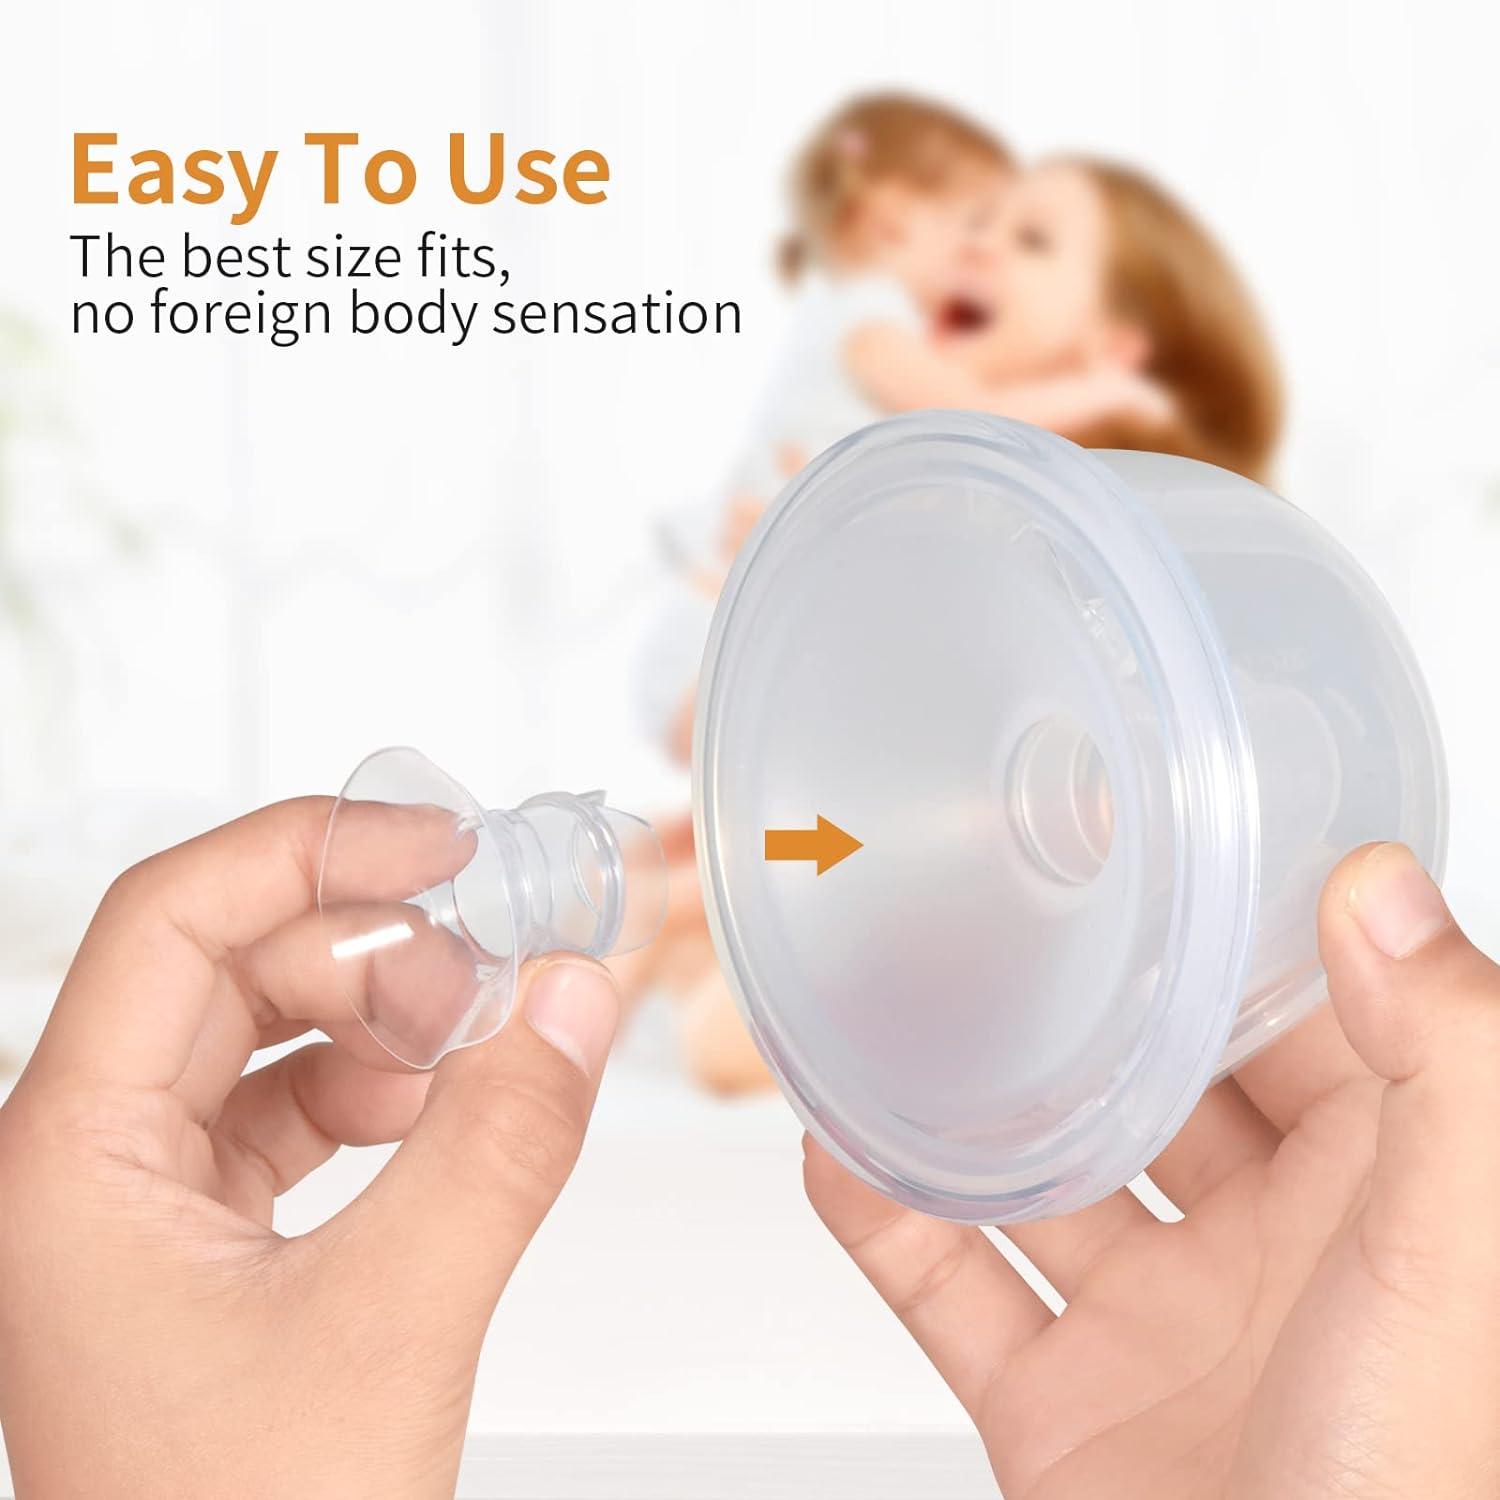 Willow Breast Pump Sizing Insert, 19mm for 15mm-17mm Nipple Size